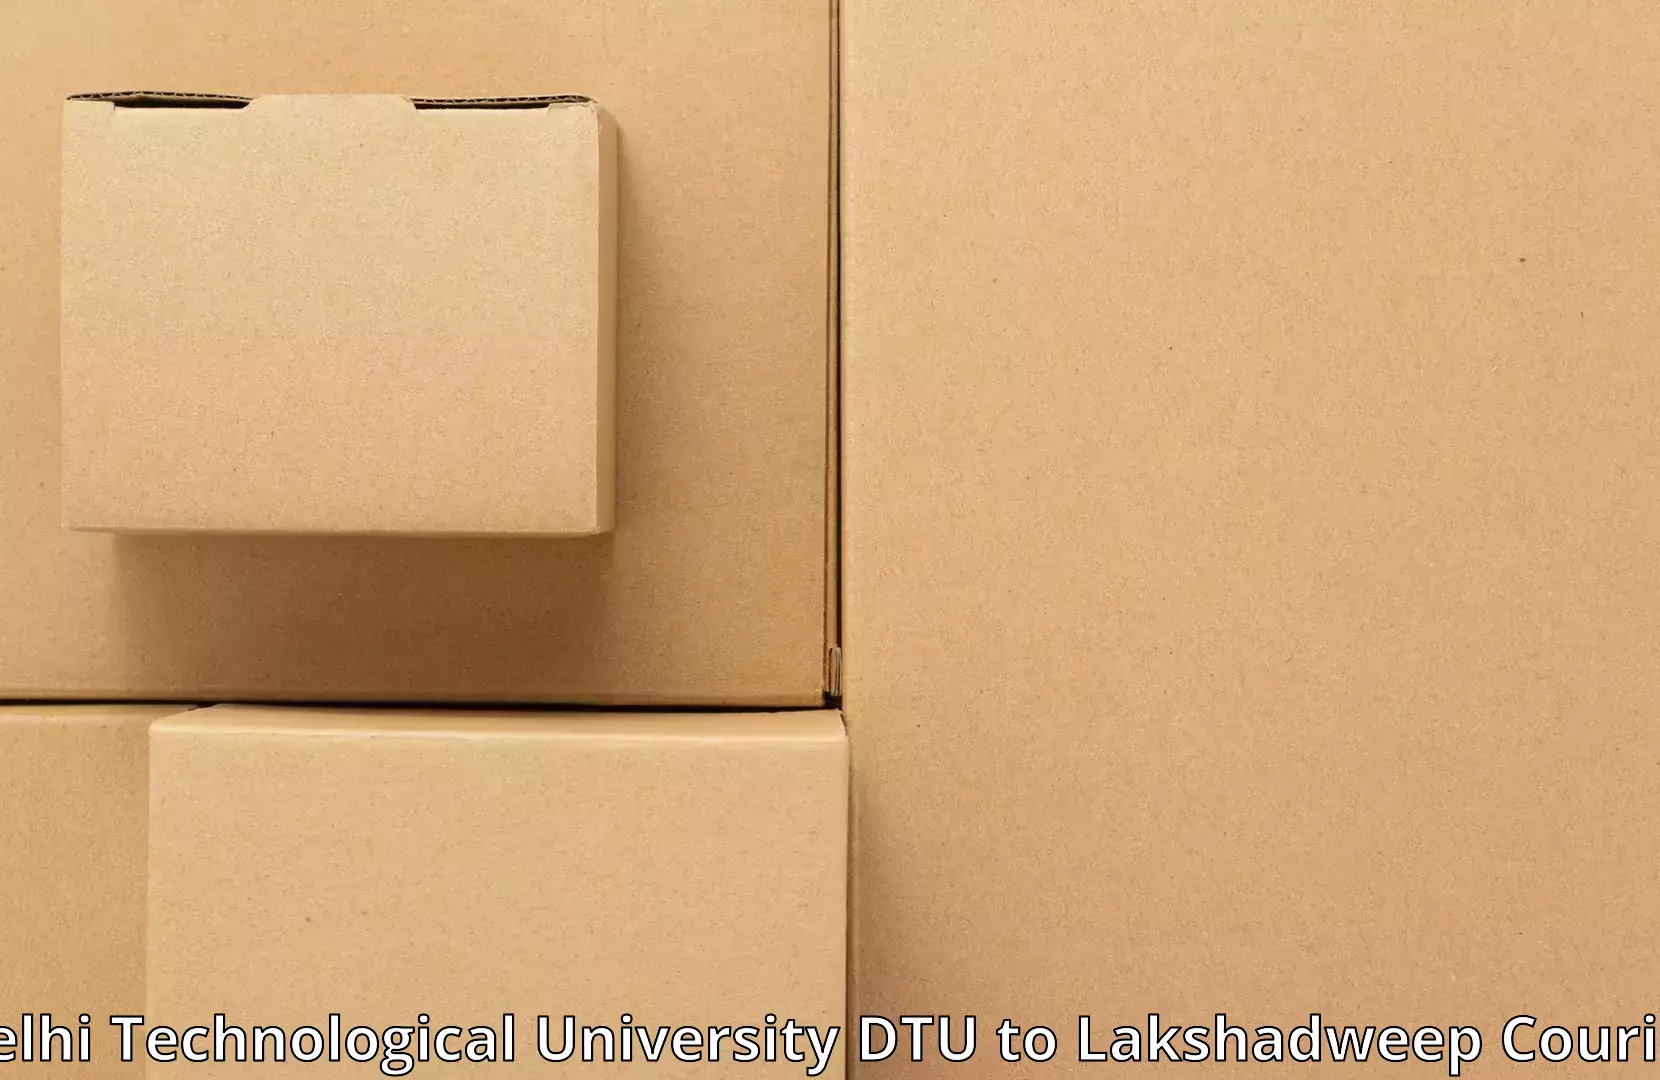 Trusted relocation services Delhi Technological University DTU to Lakshadweep